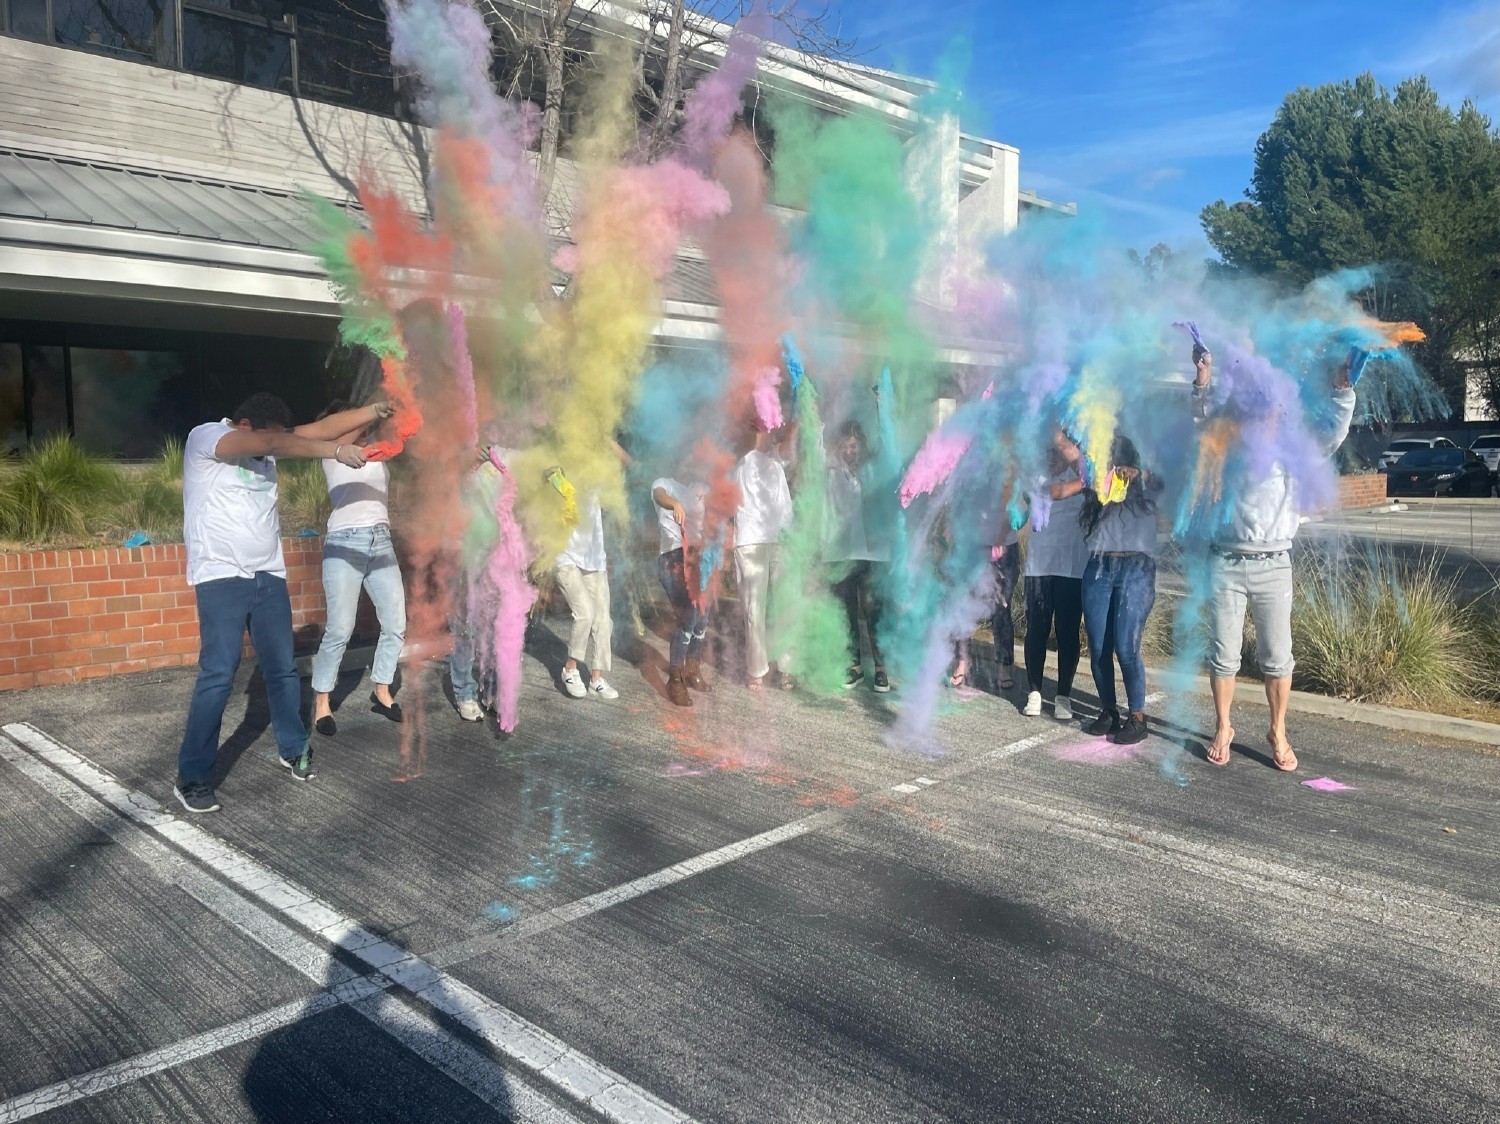 Our HQ celebrating Holi, the Festival of Colors! 